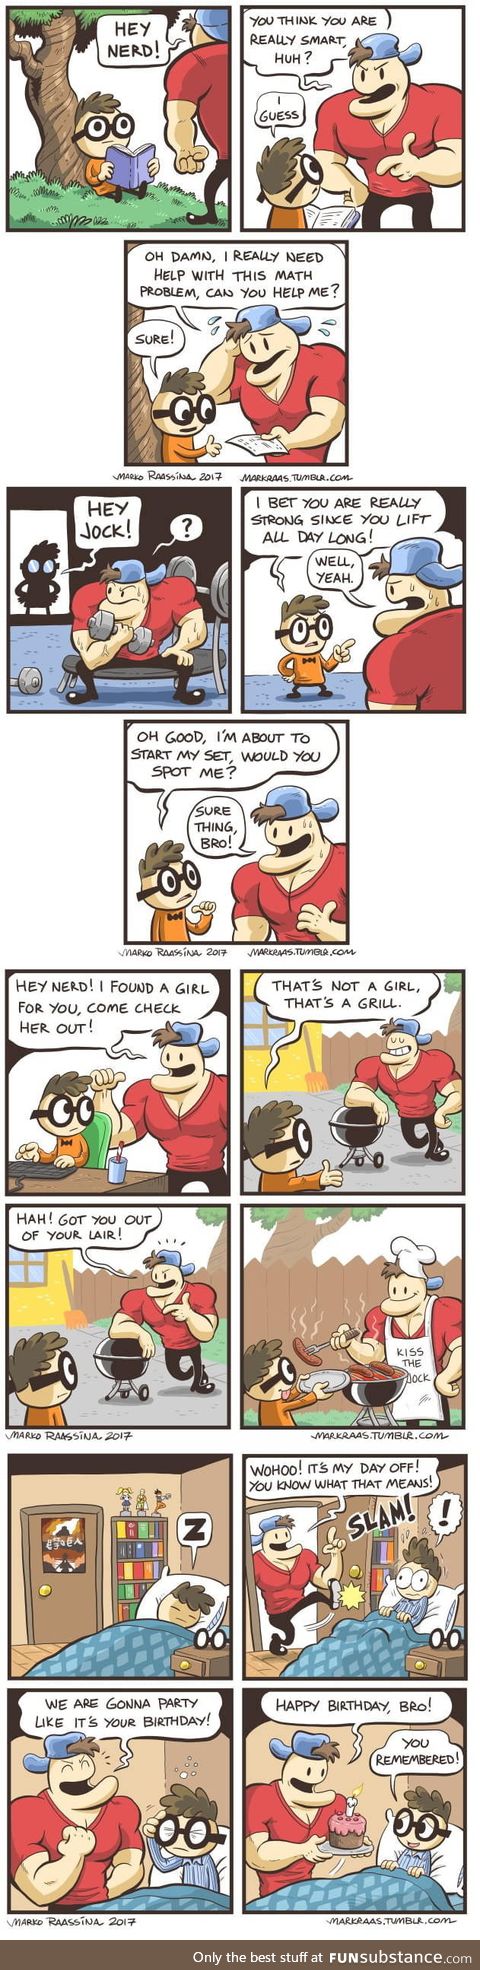 Wholesome nerd and jock